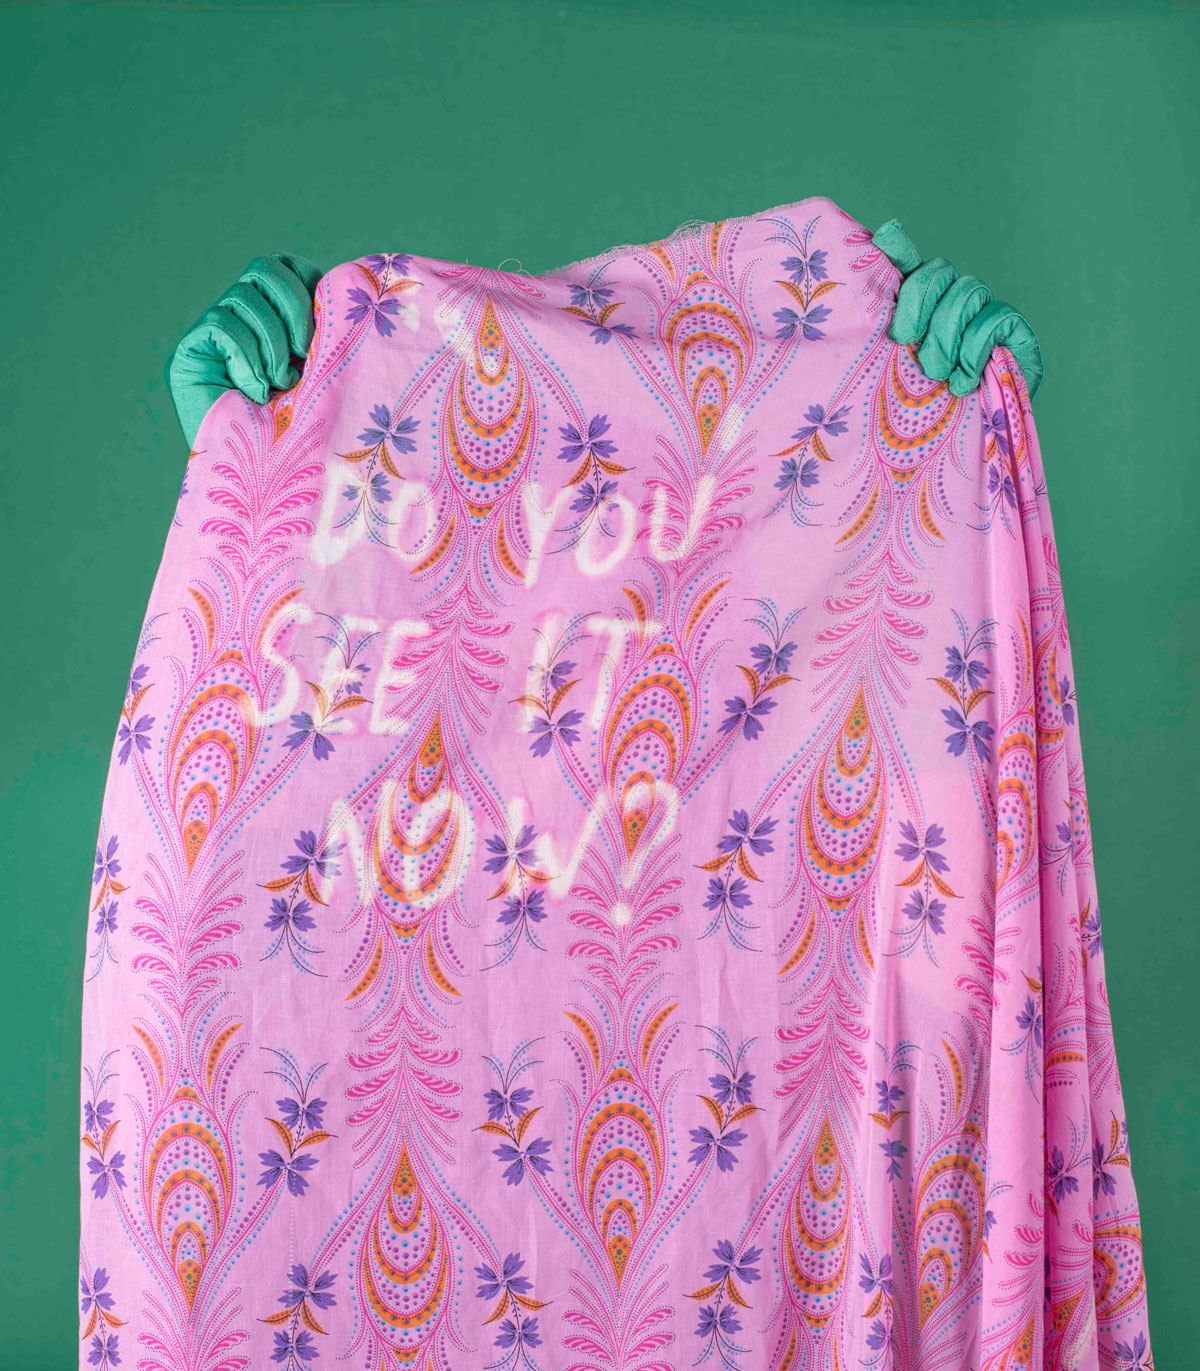 Green hands hold up a pink-patterned fabric with the text: Do you see it now?